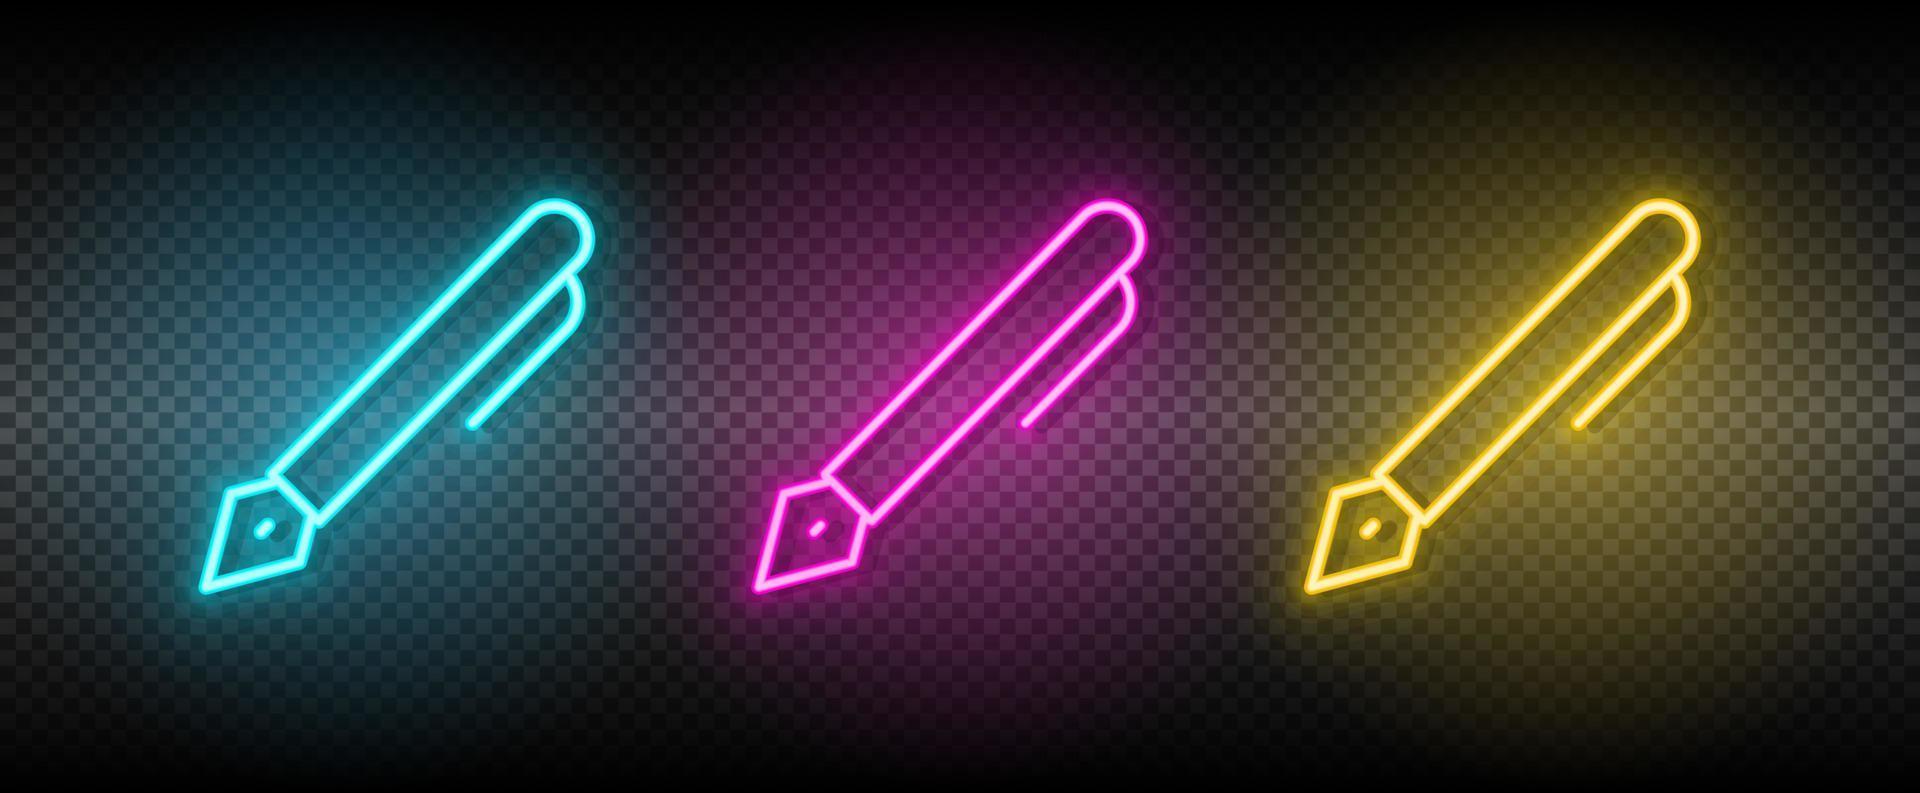 pen vector icon yellow, pink, blue neon set. Tools vector icon on dark transparency background